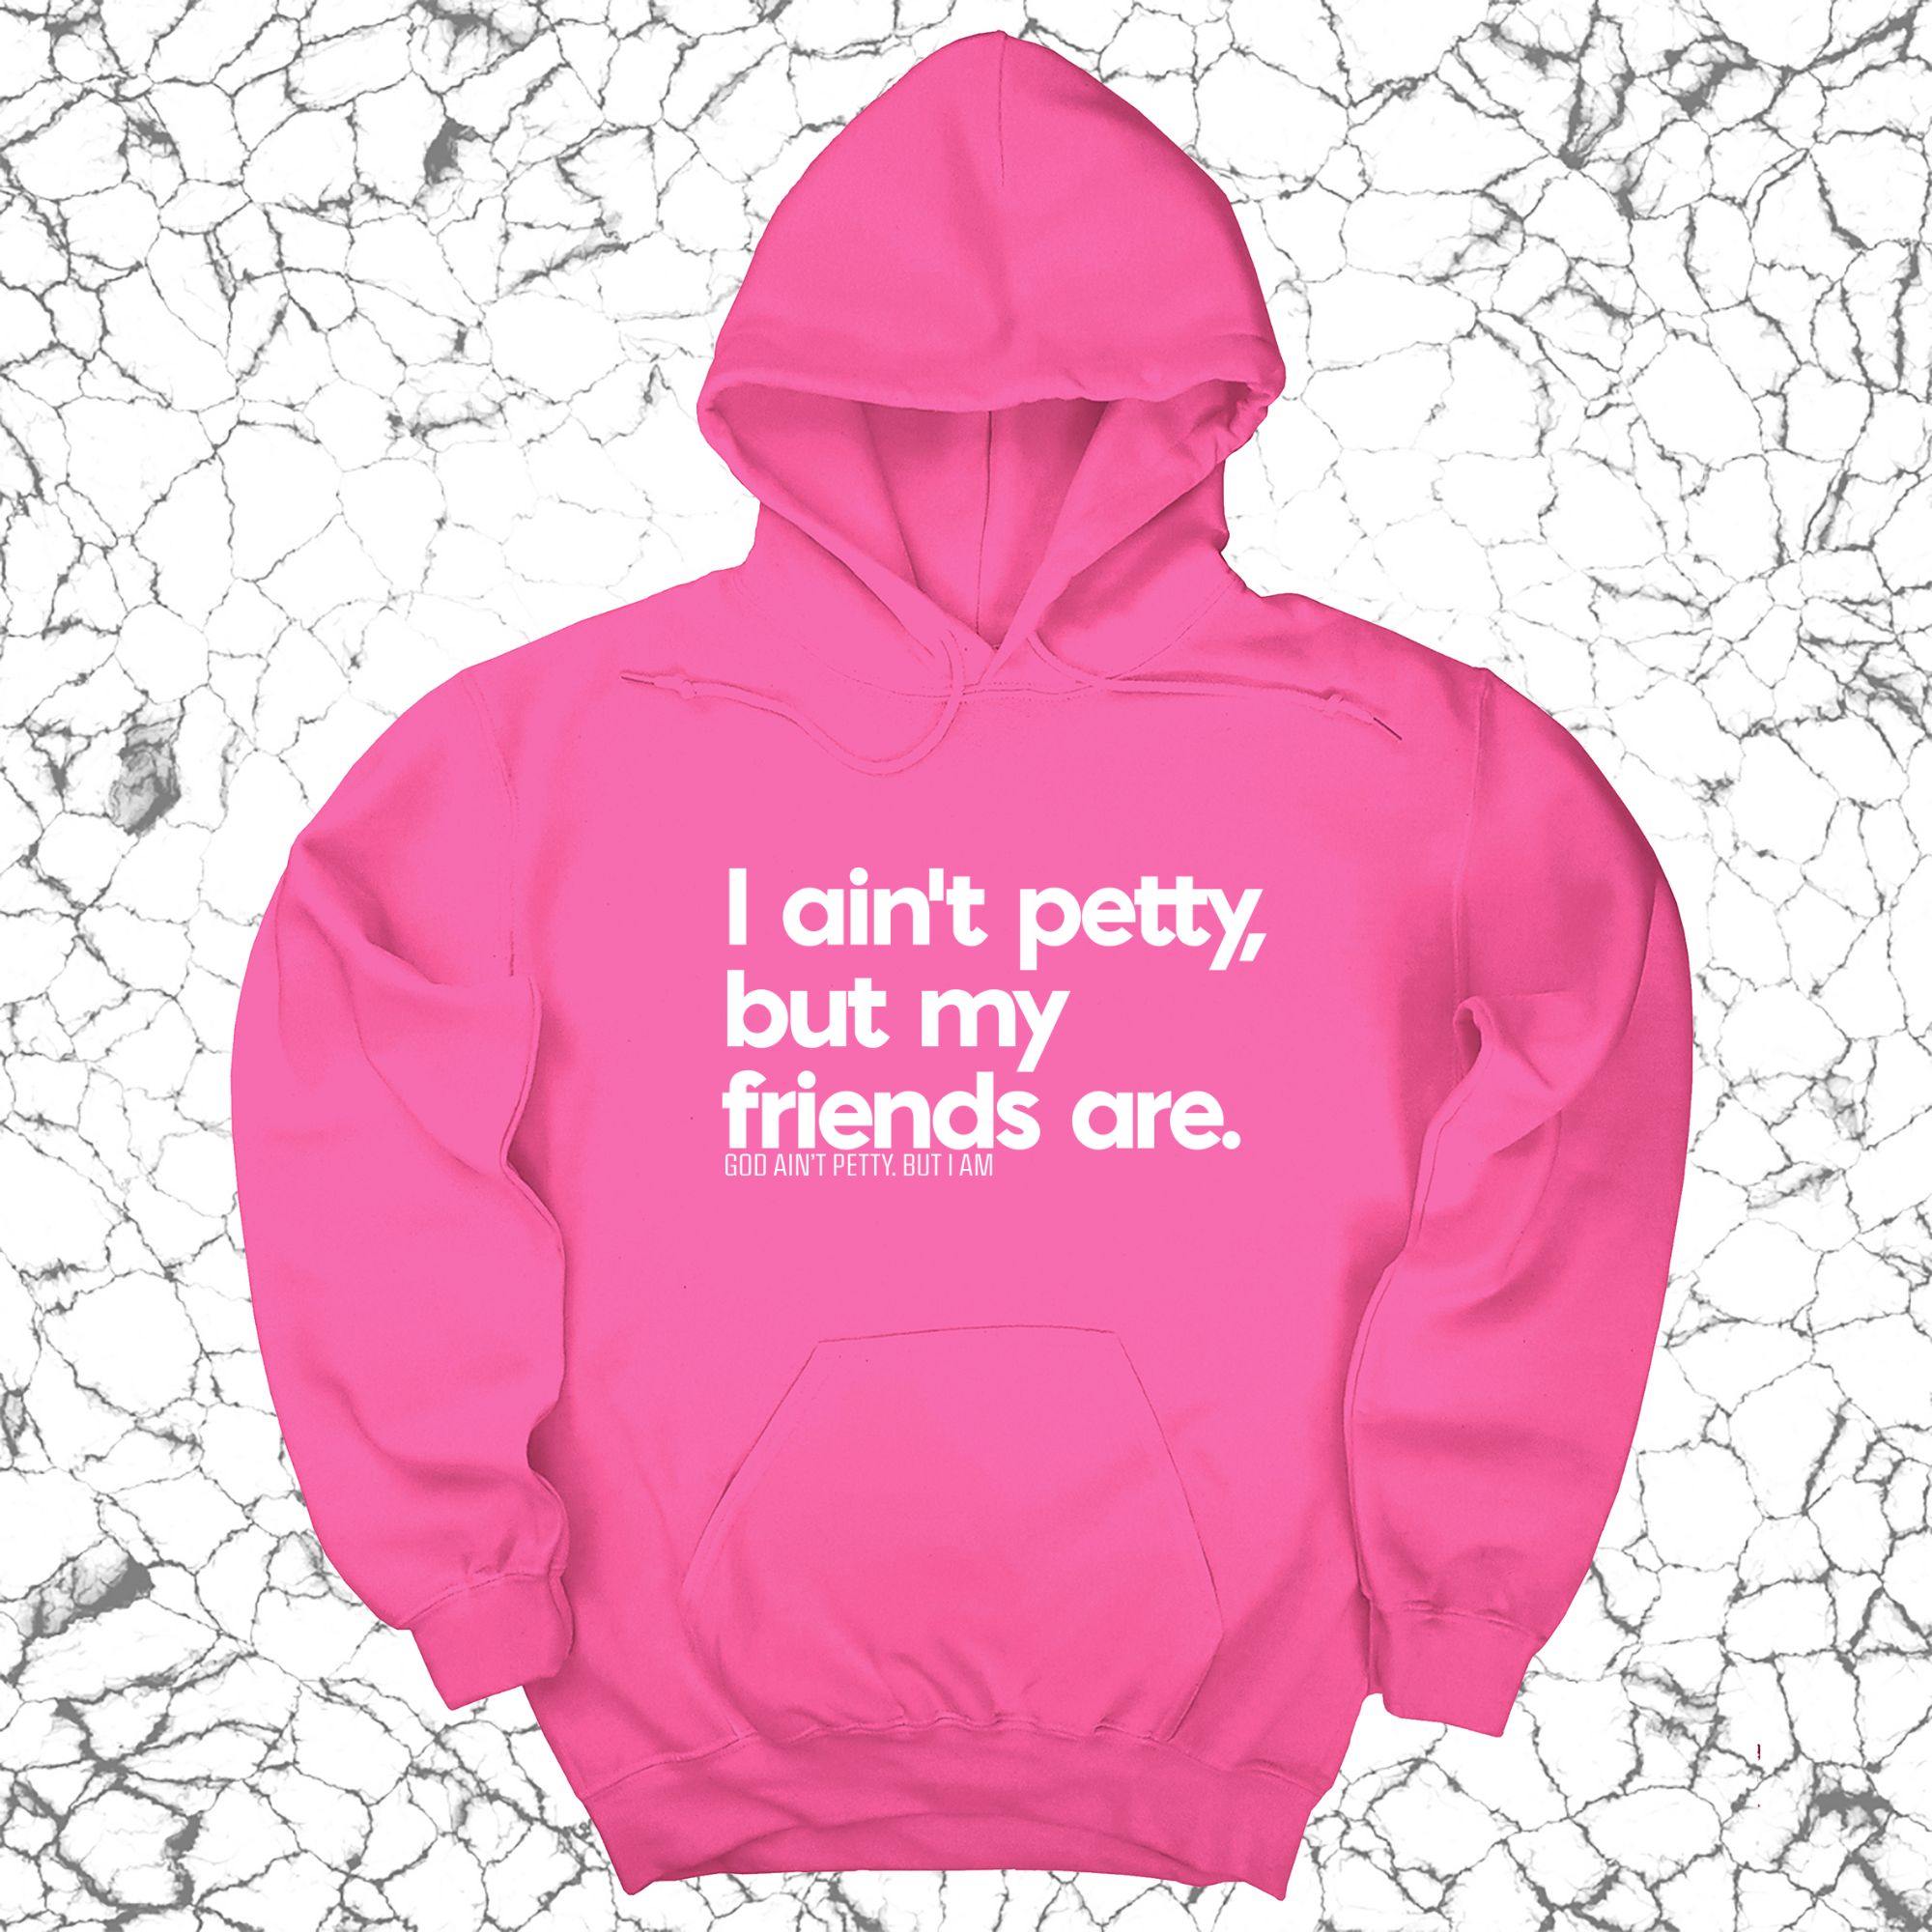 I ain't petty, but my friends are Unisex Hoodie-Hoodie-The Original God Ain't Petty But I Am